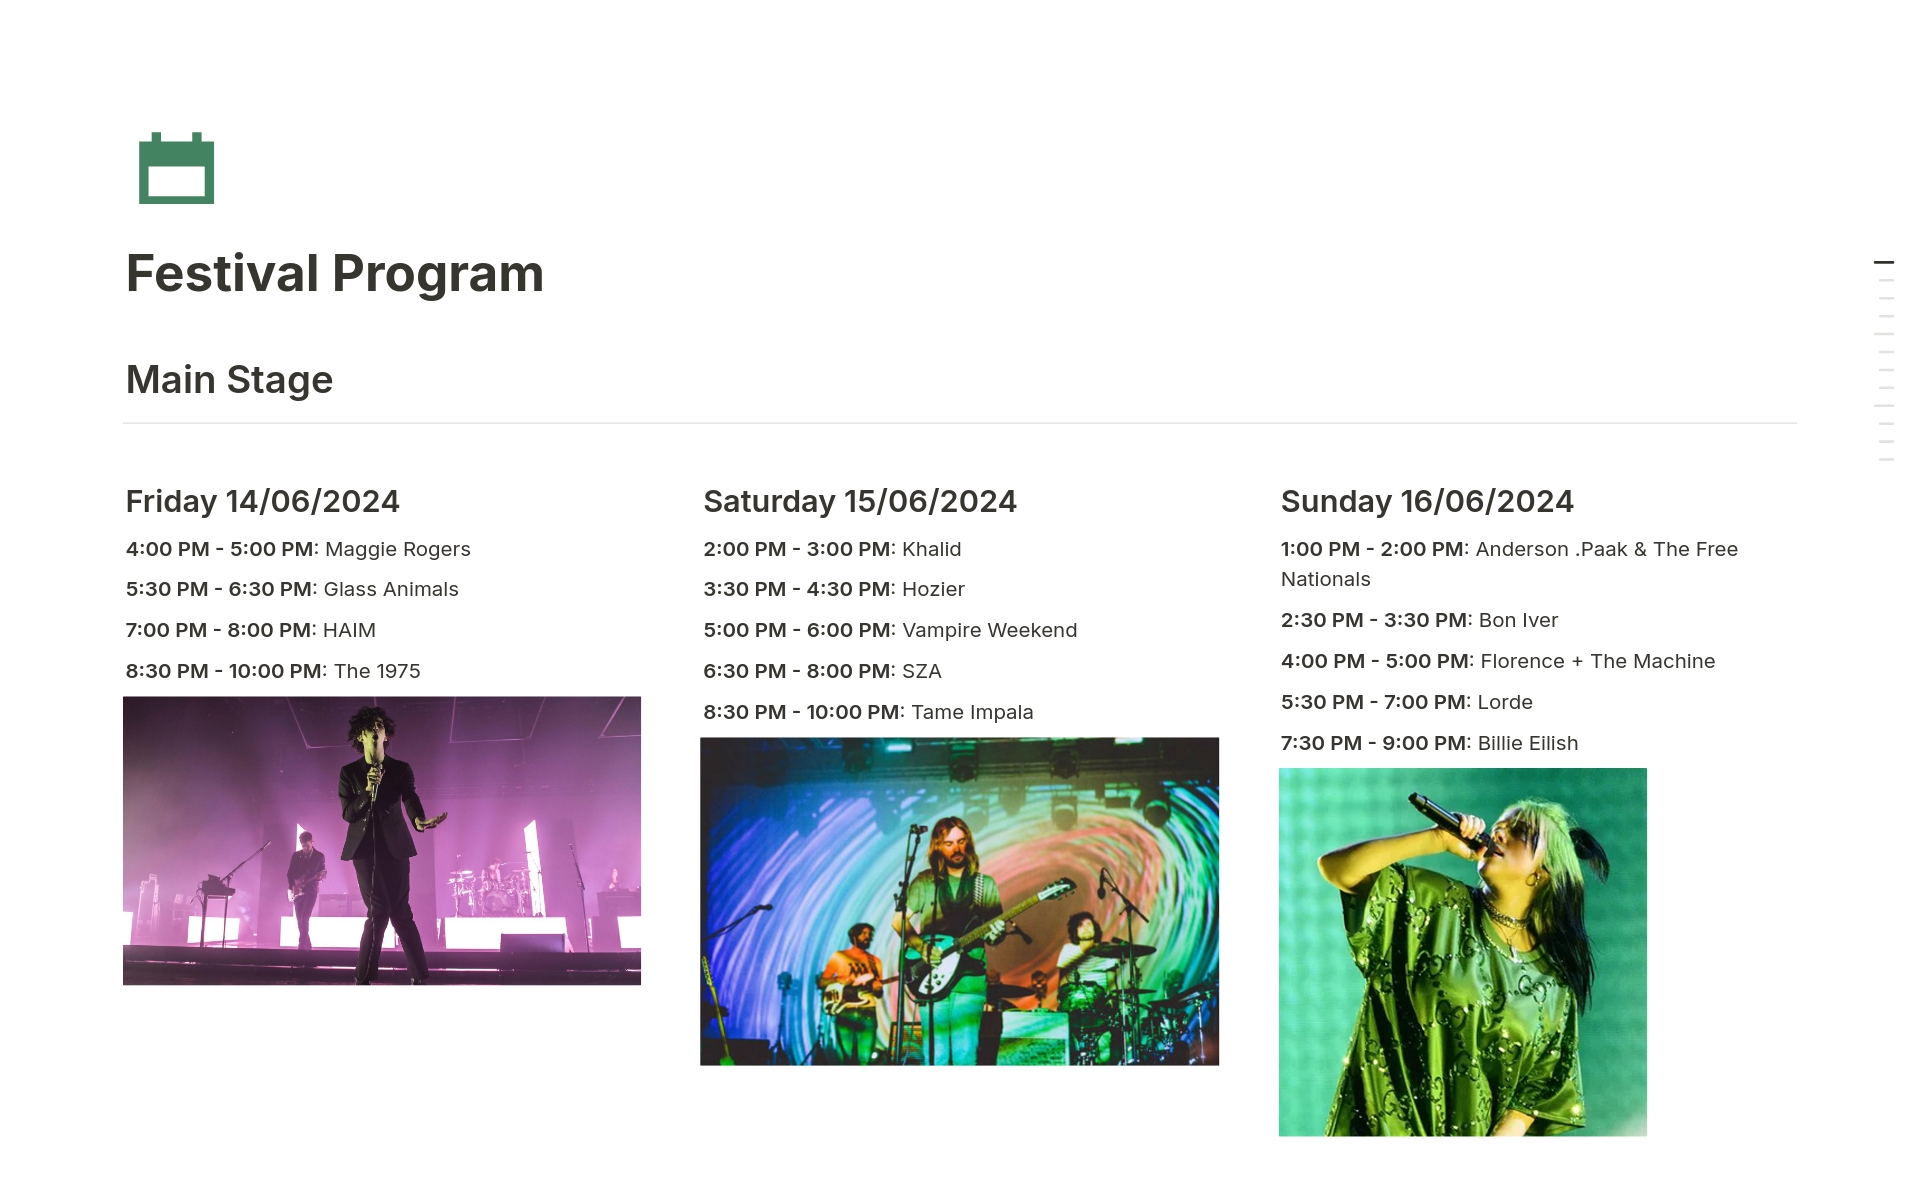 An events website template designed for a summer music festival, featuring lineup, schedule, and ticket info.